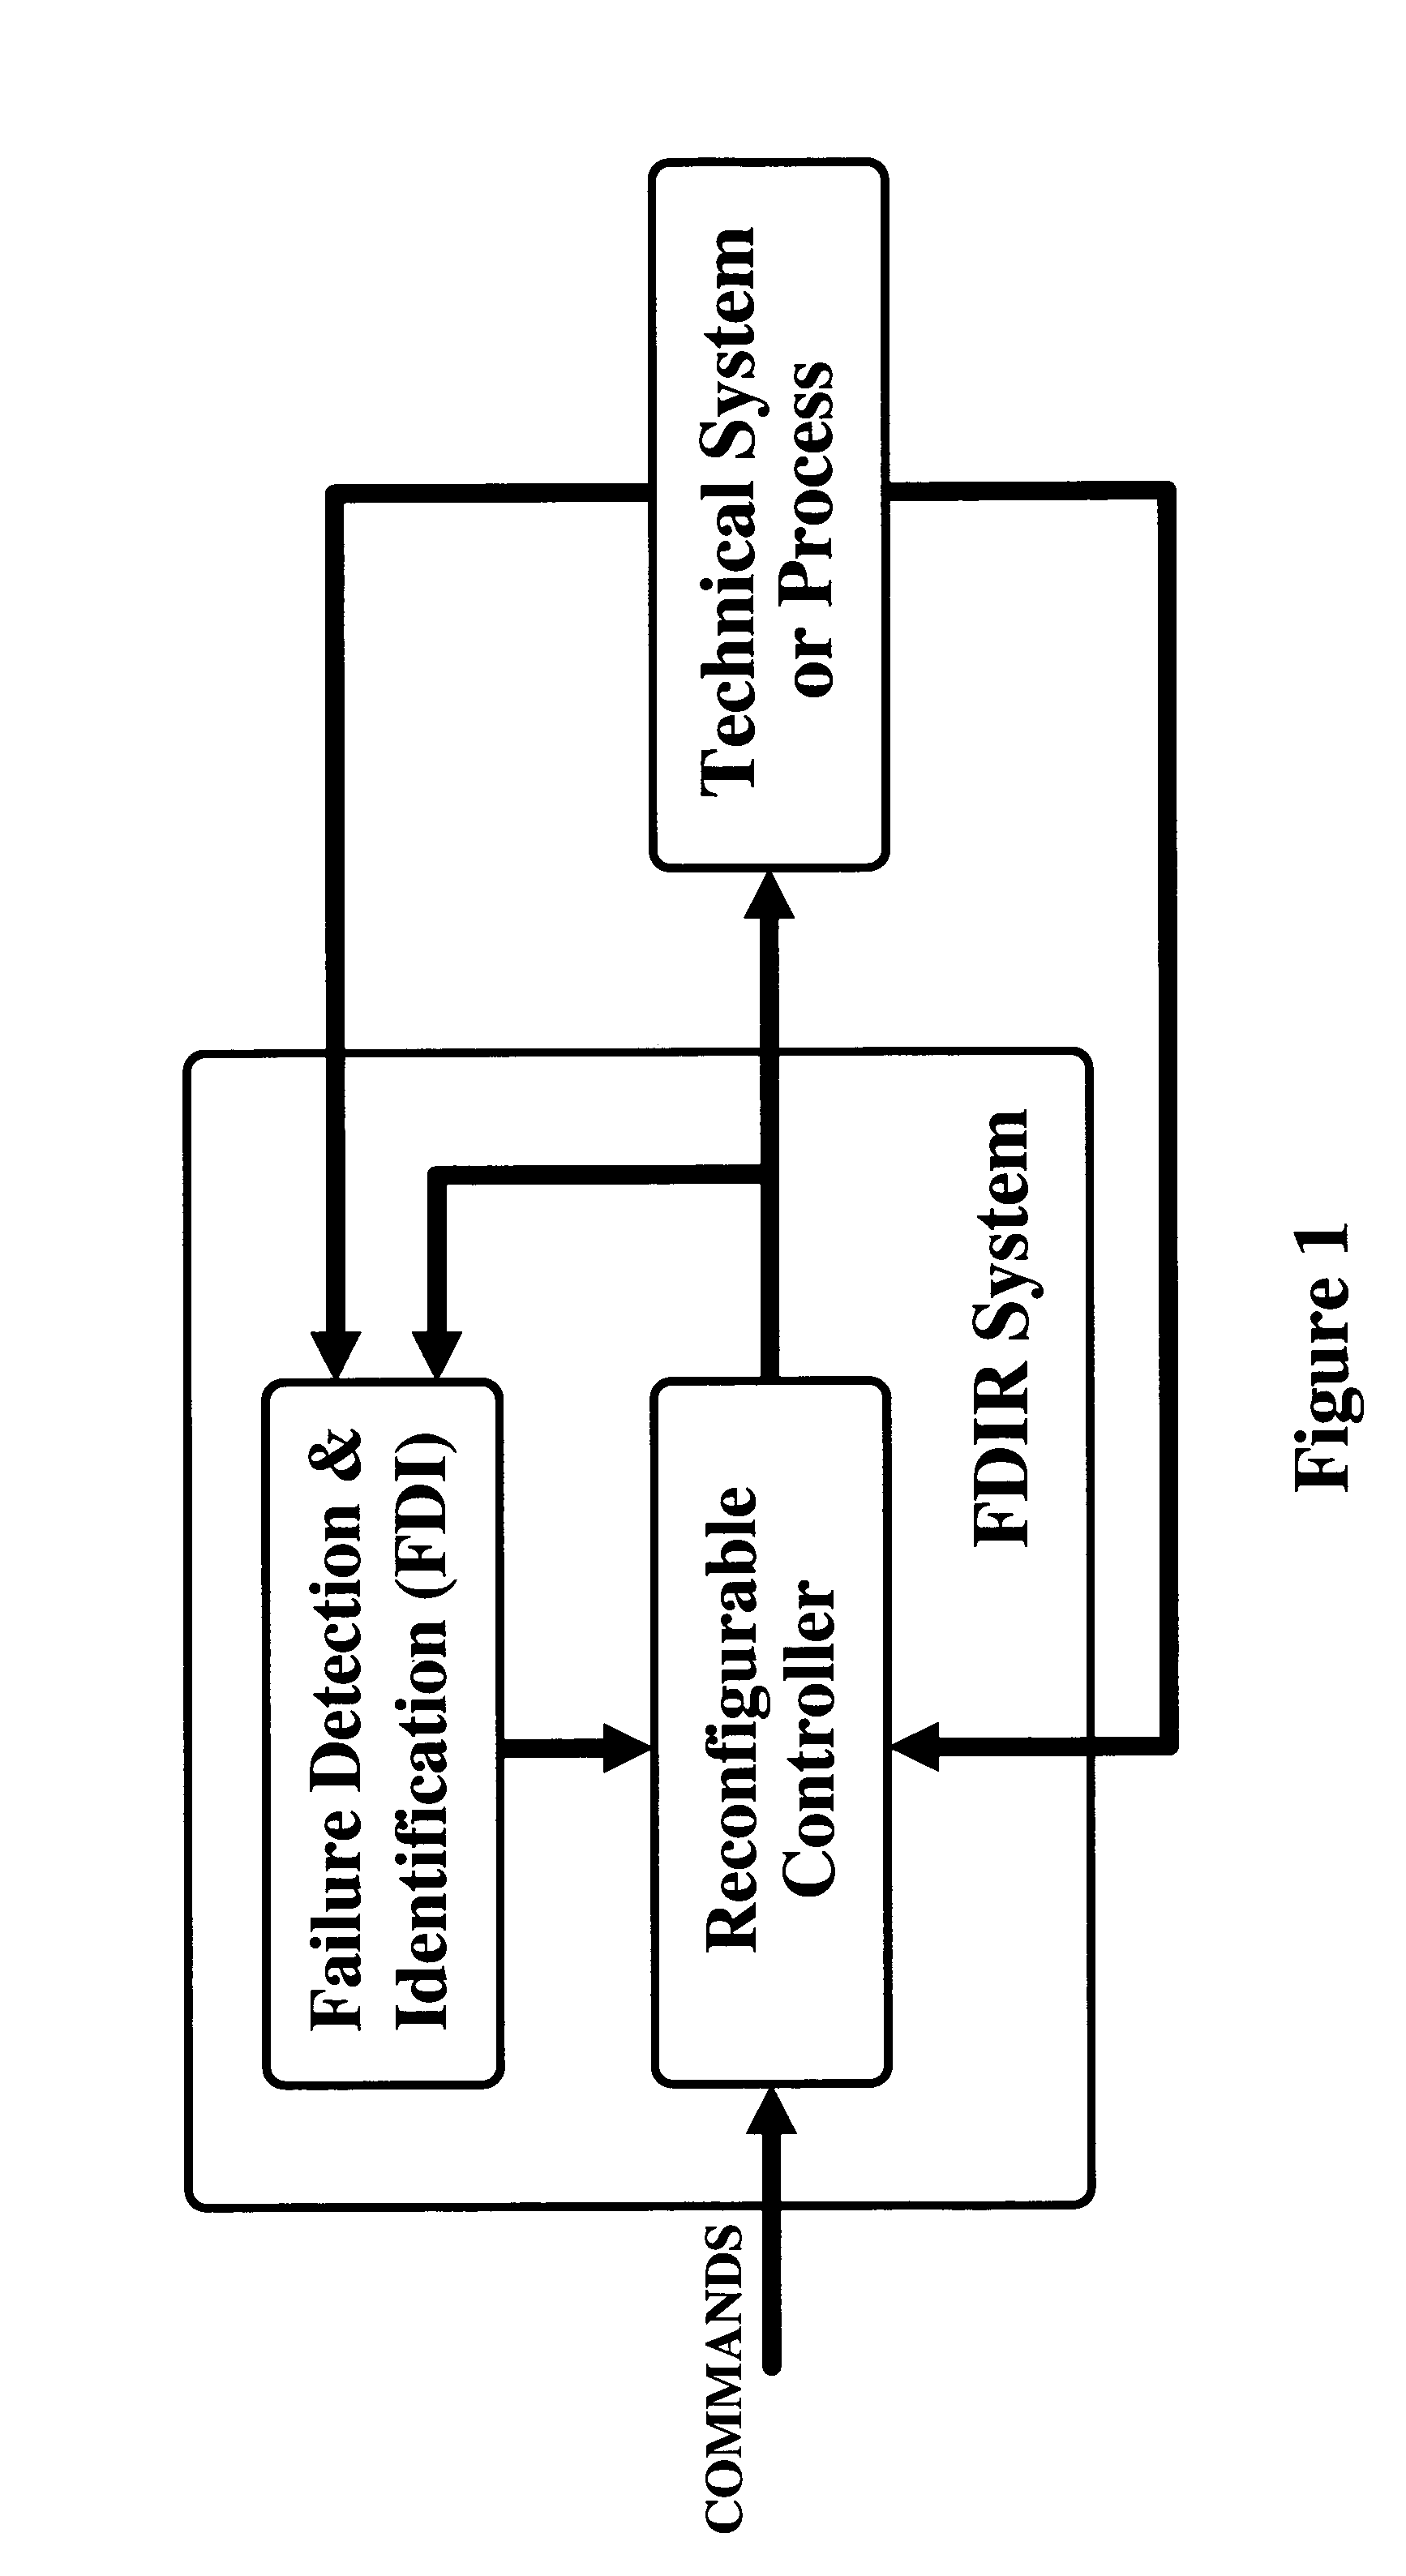 Methods and apparatus for safe, fault-tolerant control of complex technical systems